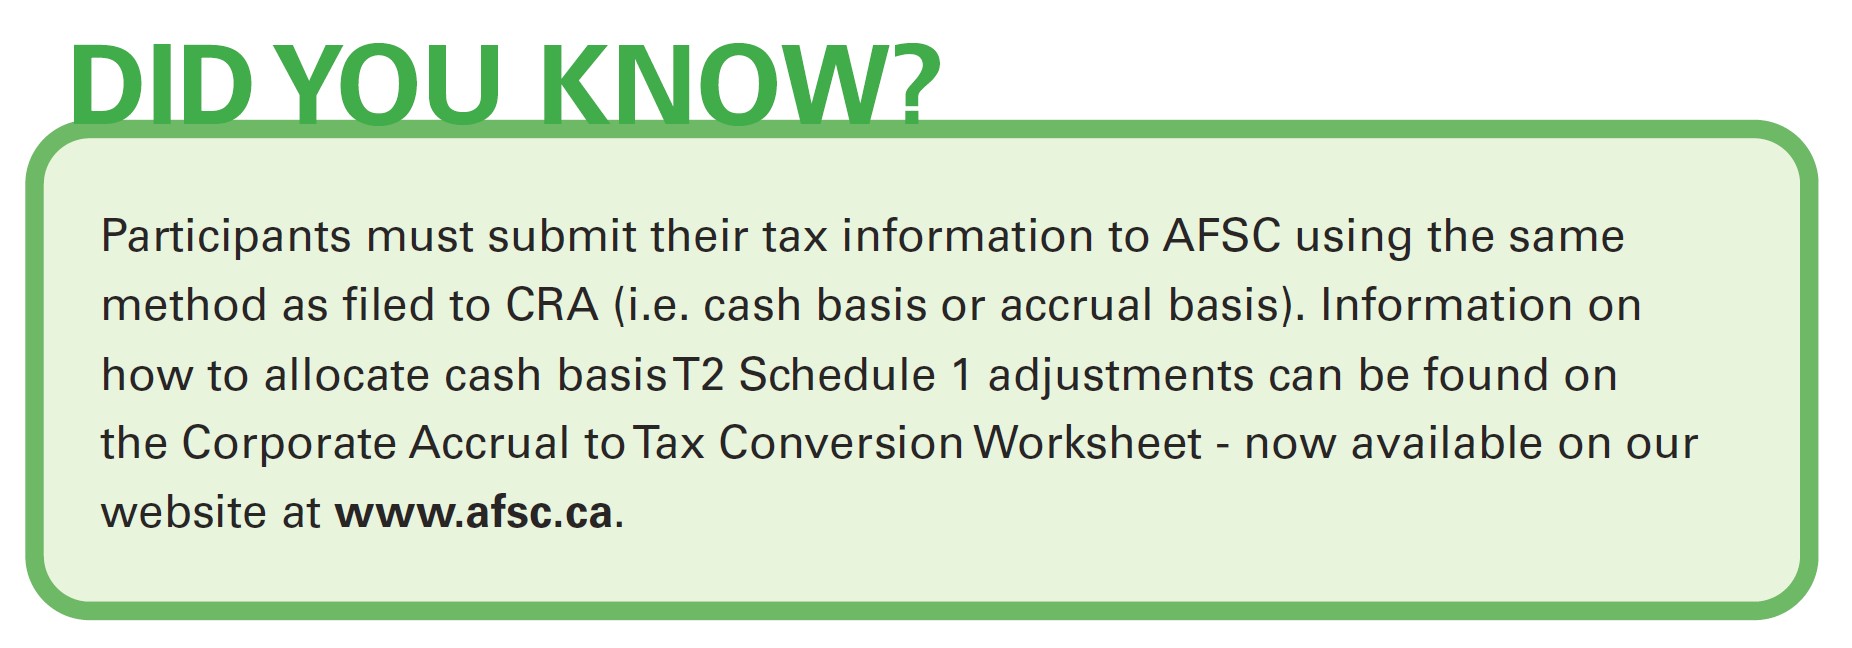 Did you know? Participants must submit their tax information to AFSC using the same method as filed to CRA (i.e. cash basis or accrual basis). Information on how to allocate cash basis T2 Schedule 1 adjustments can be found on the Corporate Accrual to Tax Conversion Worksheet - available on this website.